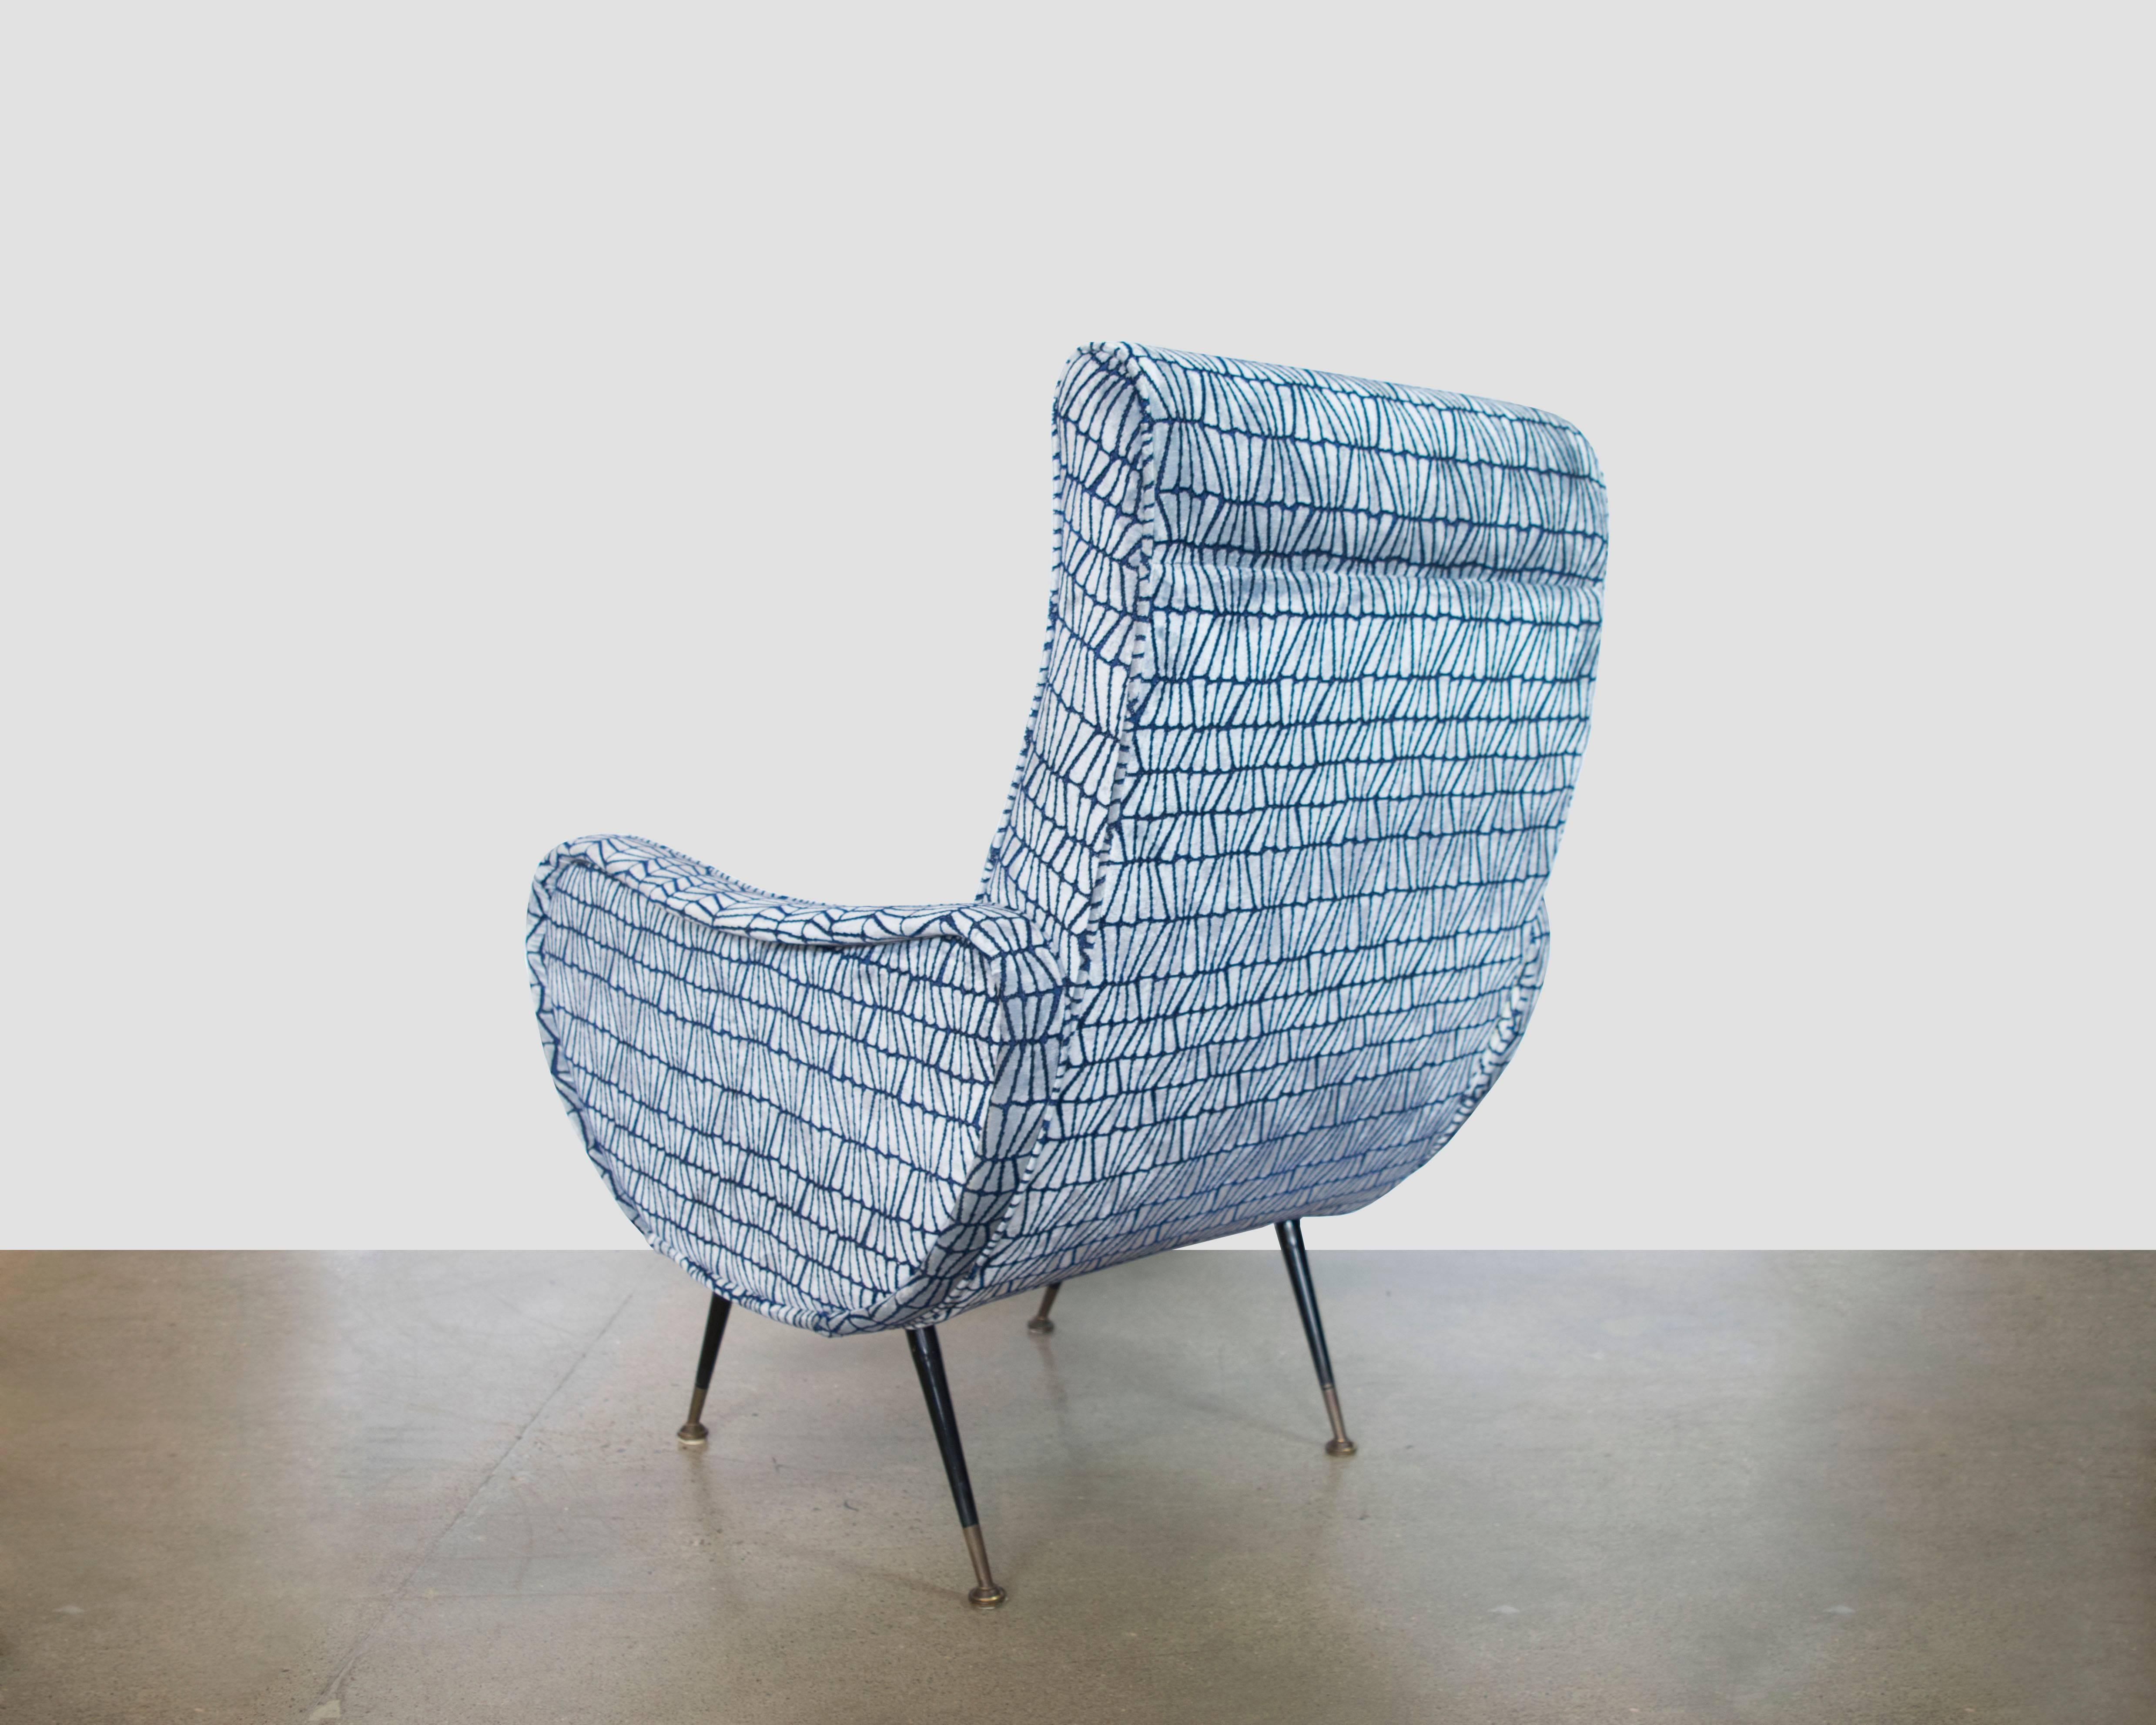 Gorgeous sculptural Italian armchair made by Arflex in the 1950s, thought to be designed by Marco Zanuso and recently upholstered in sensational Knoll velvet firefly in navy and silver.